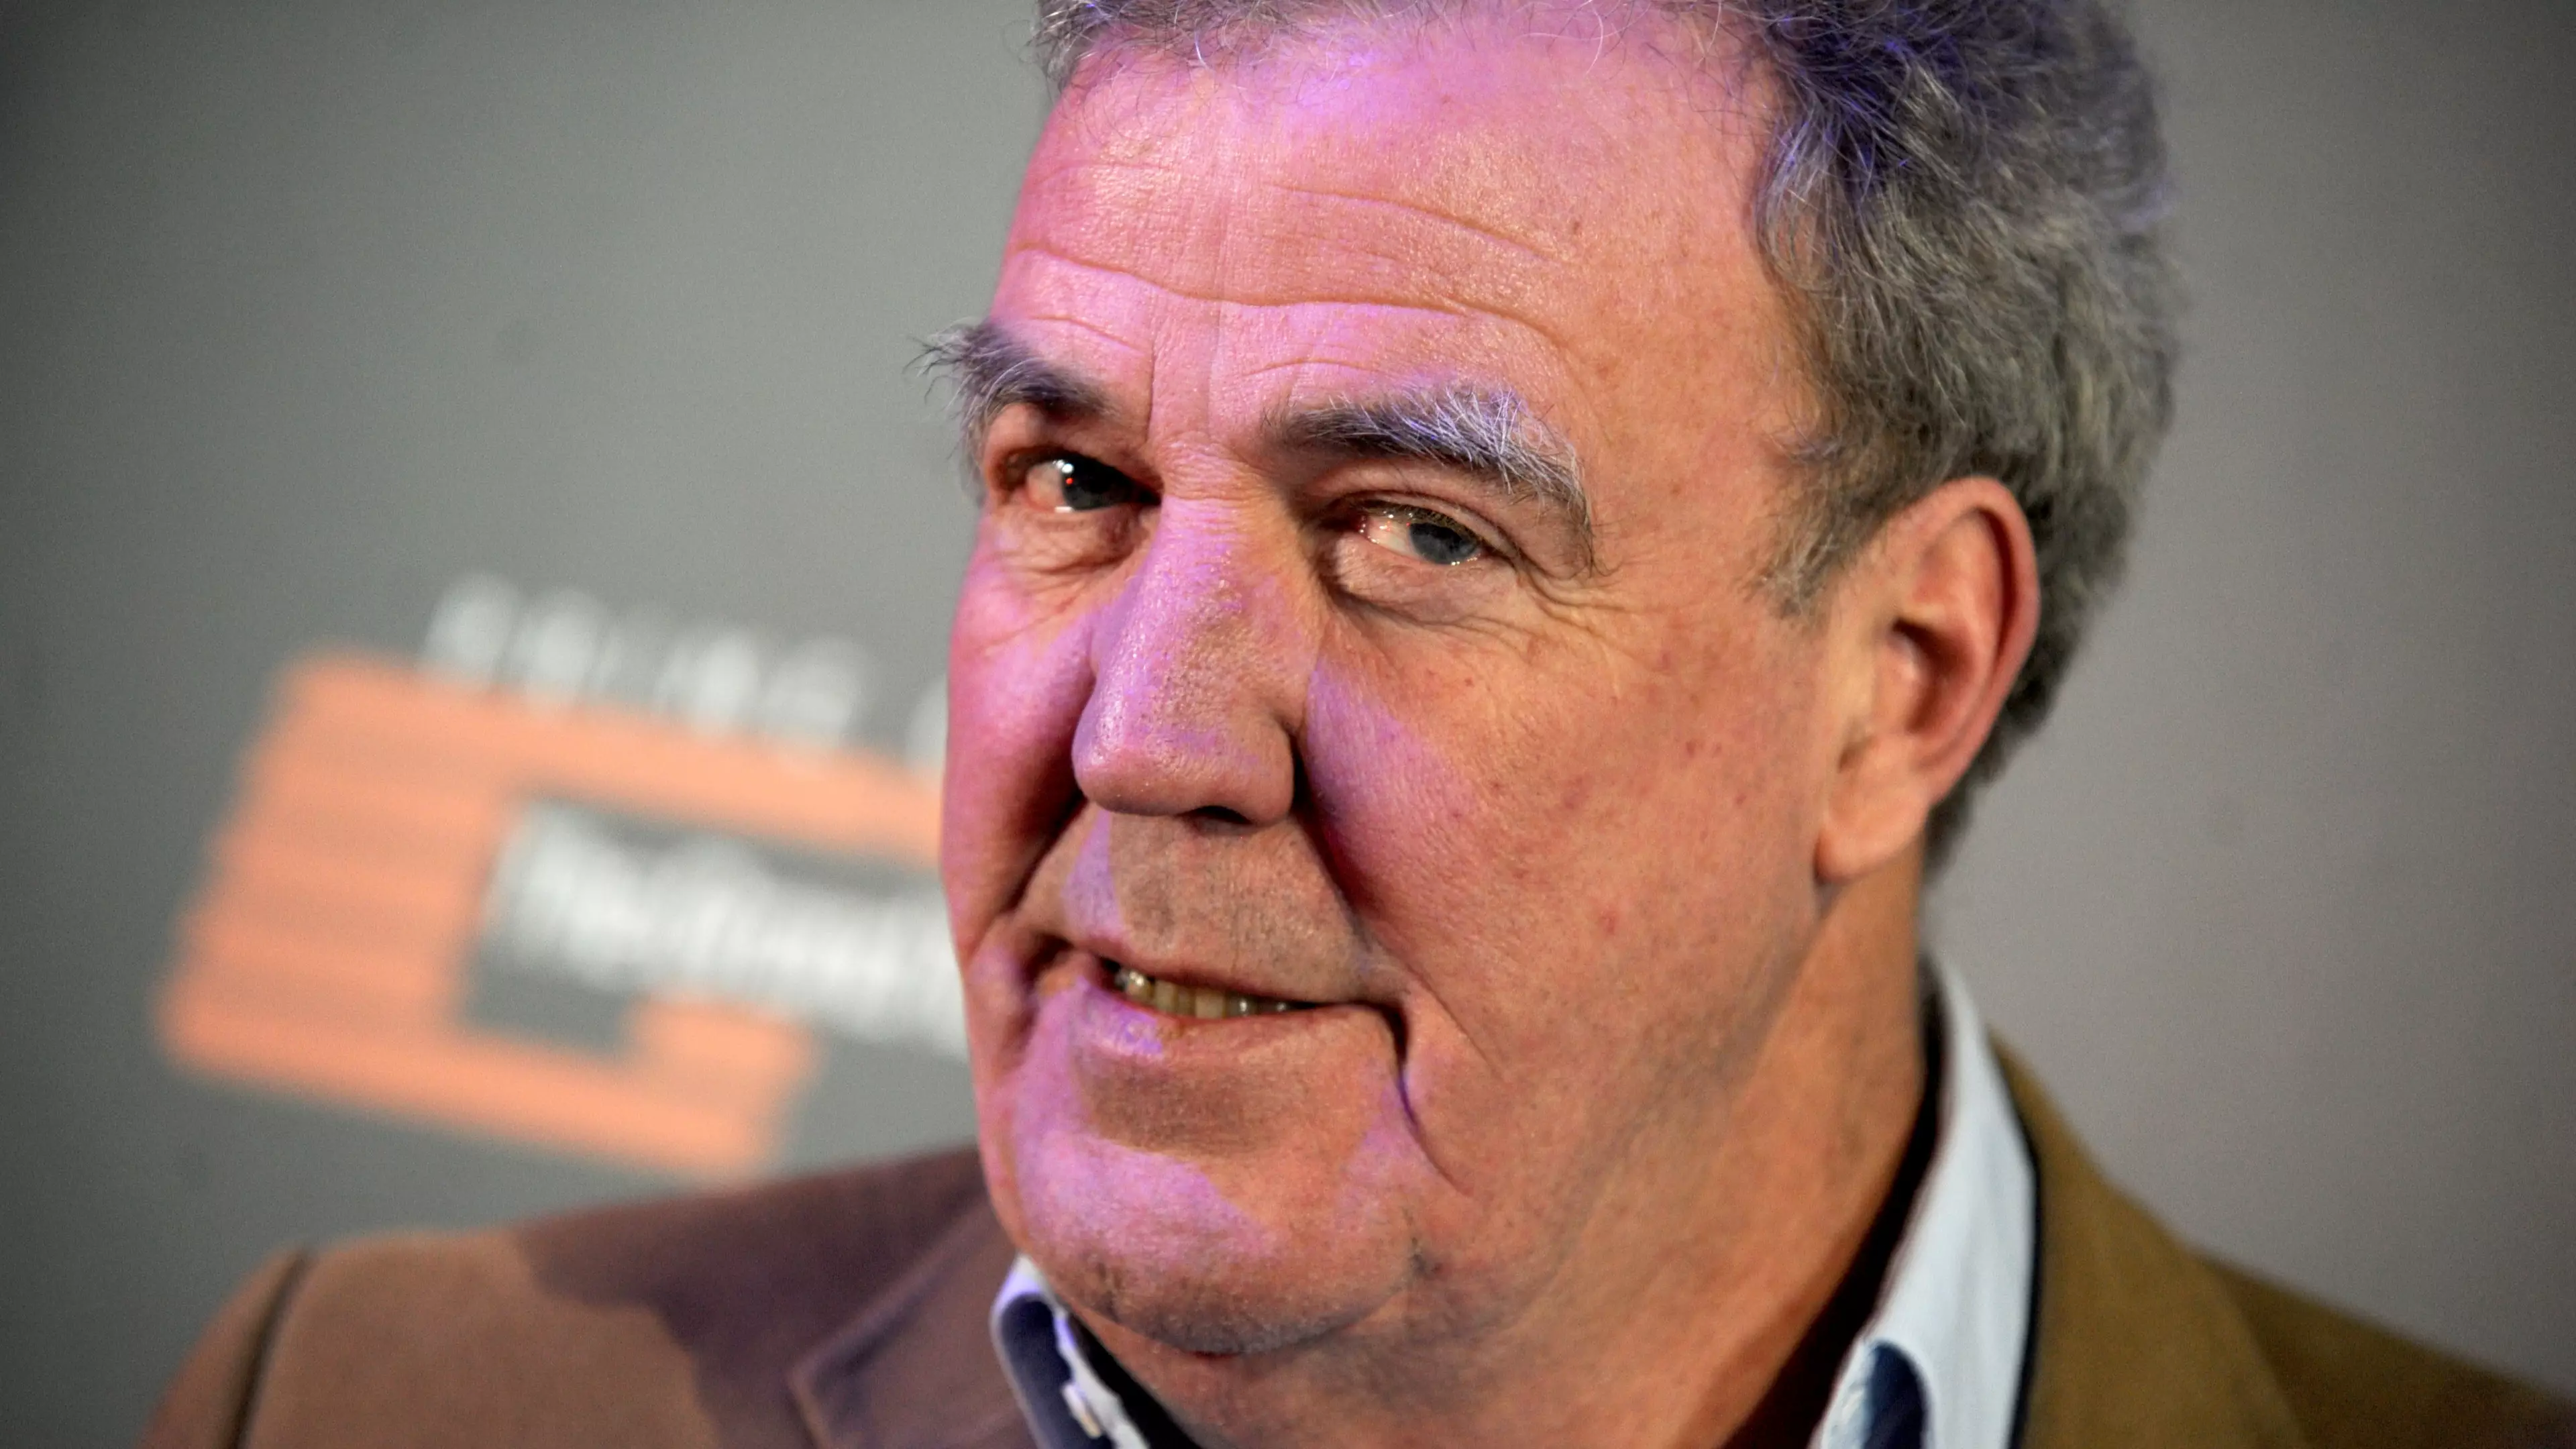 Jeremy Clarkson Once Peed In Trophy Hunter's Shoes As Payback For Killing Animals